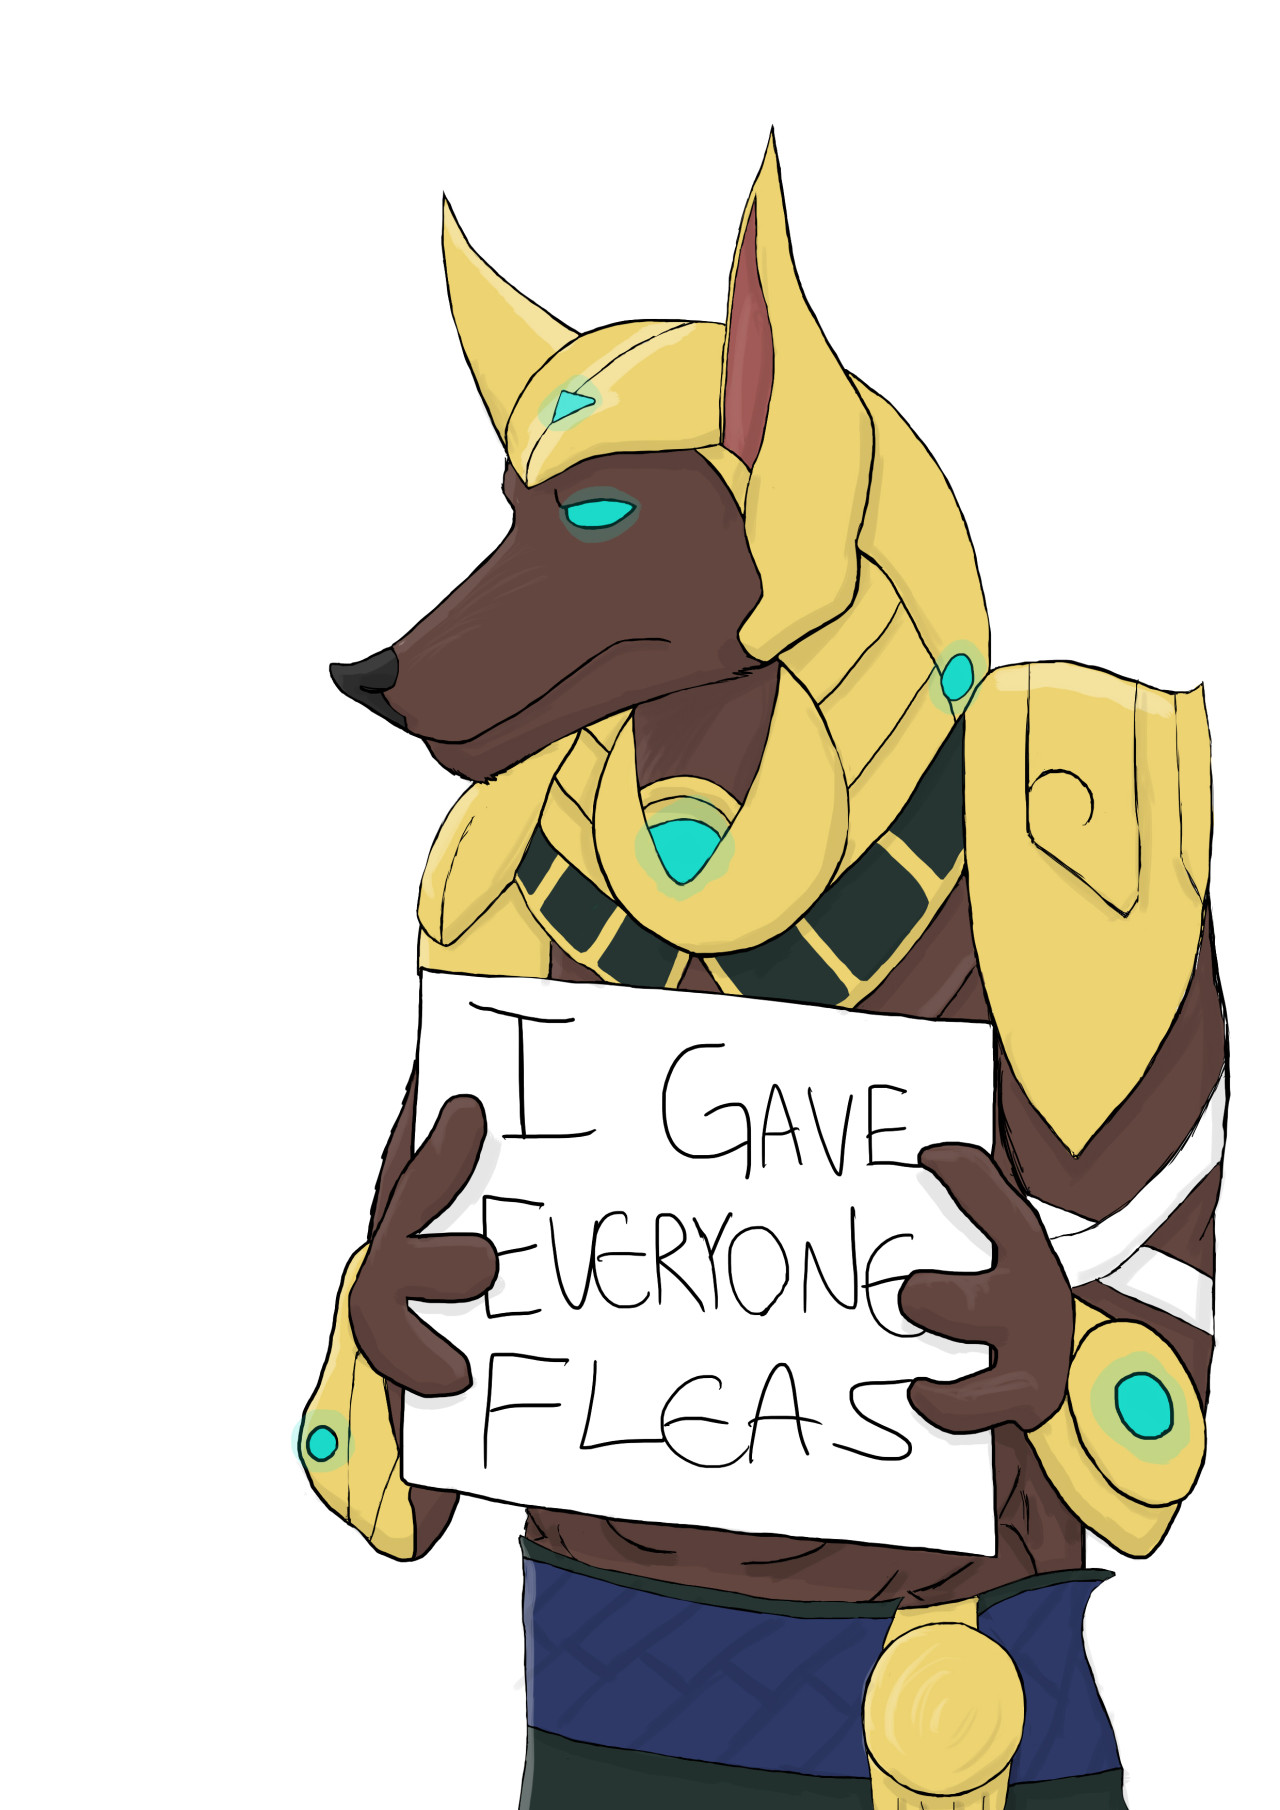 Nasus shaming.So I think this one turned out a bit better. Used the 4 quality pen